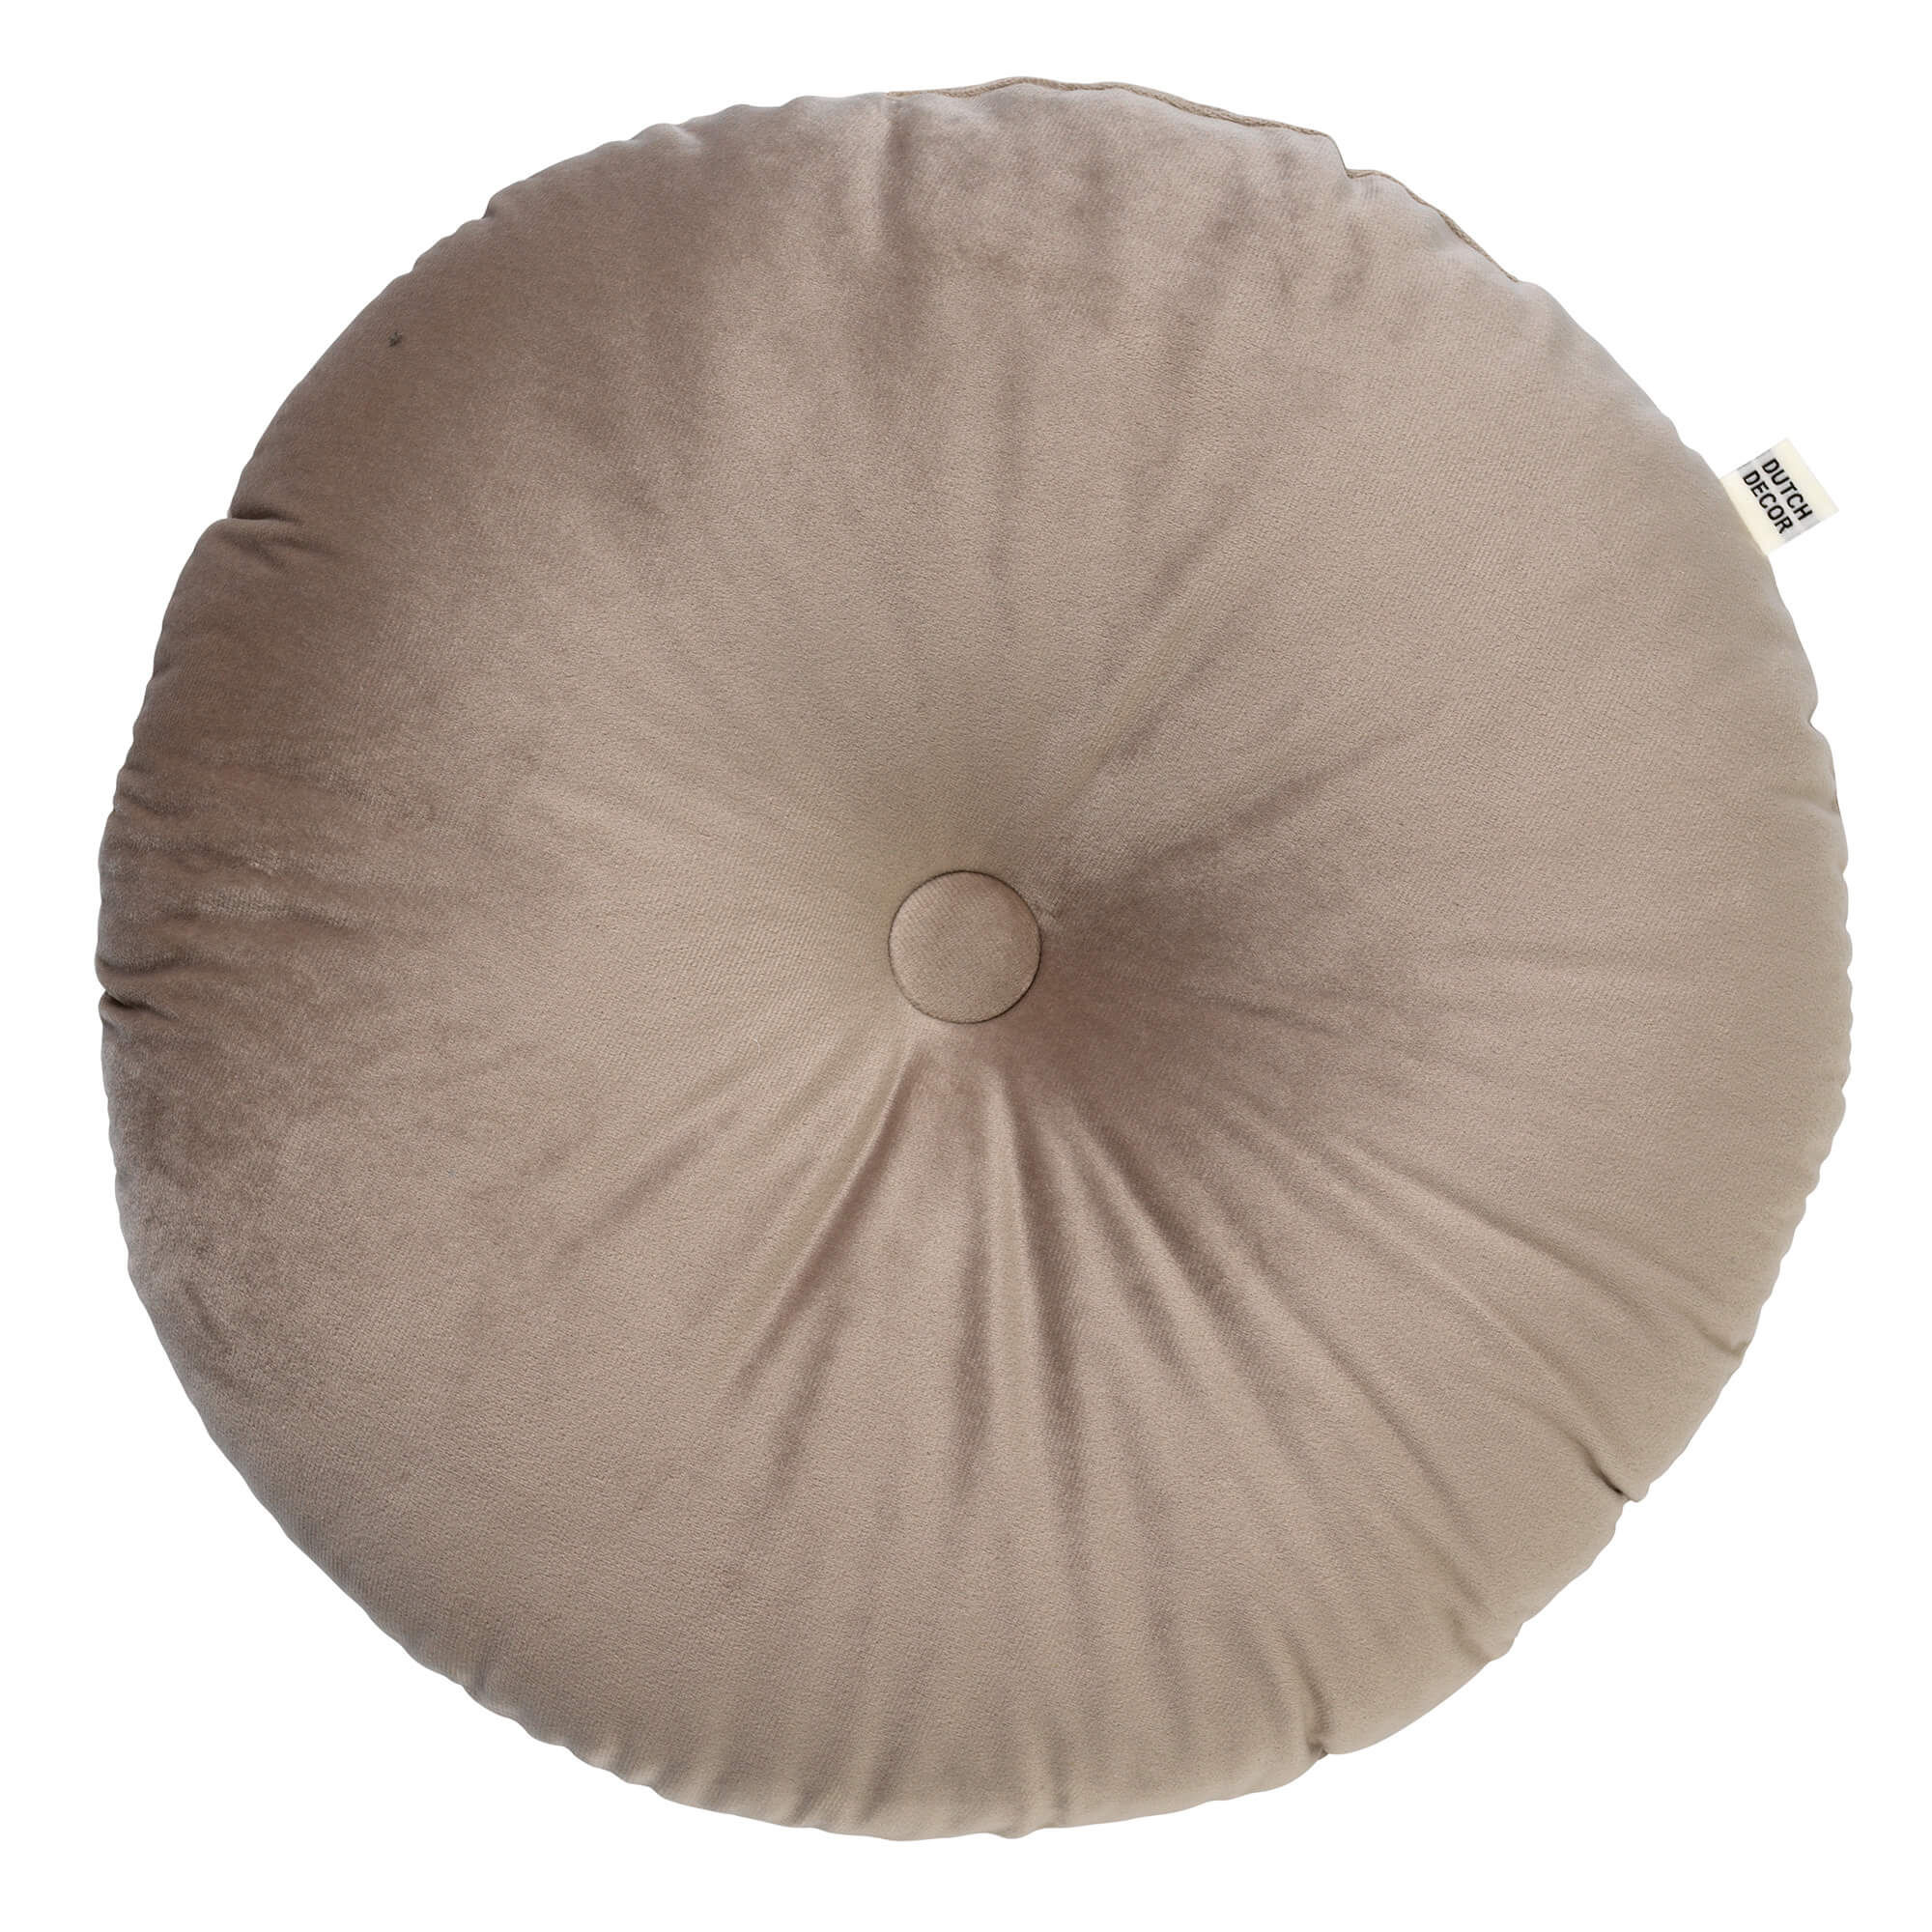 OLLY - Coussin rond en velours Pumice Stone 40 cm 